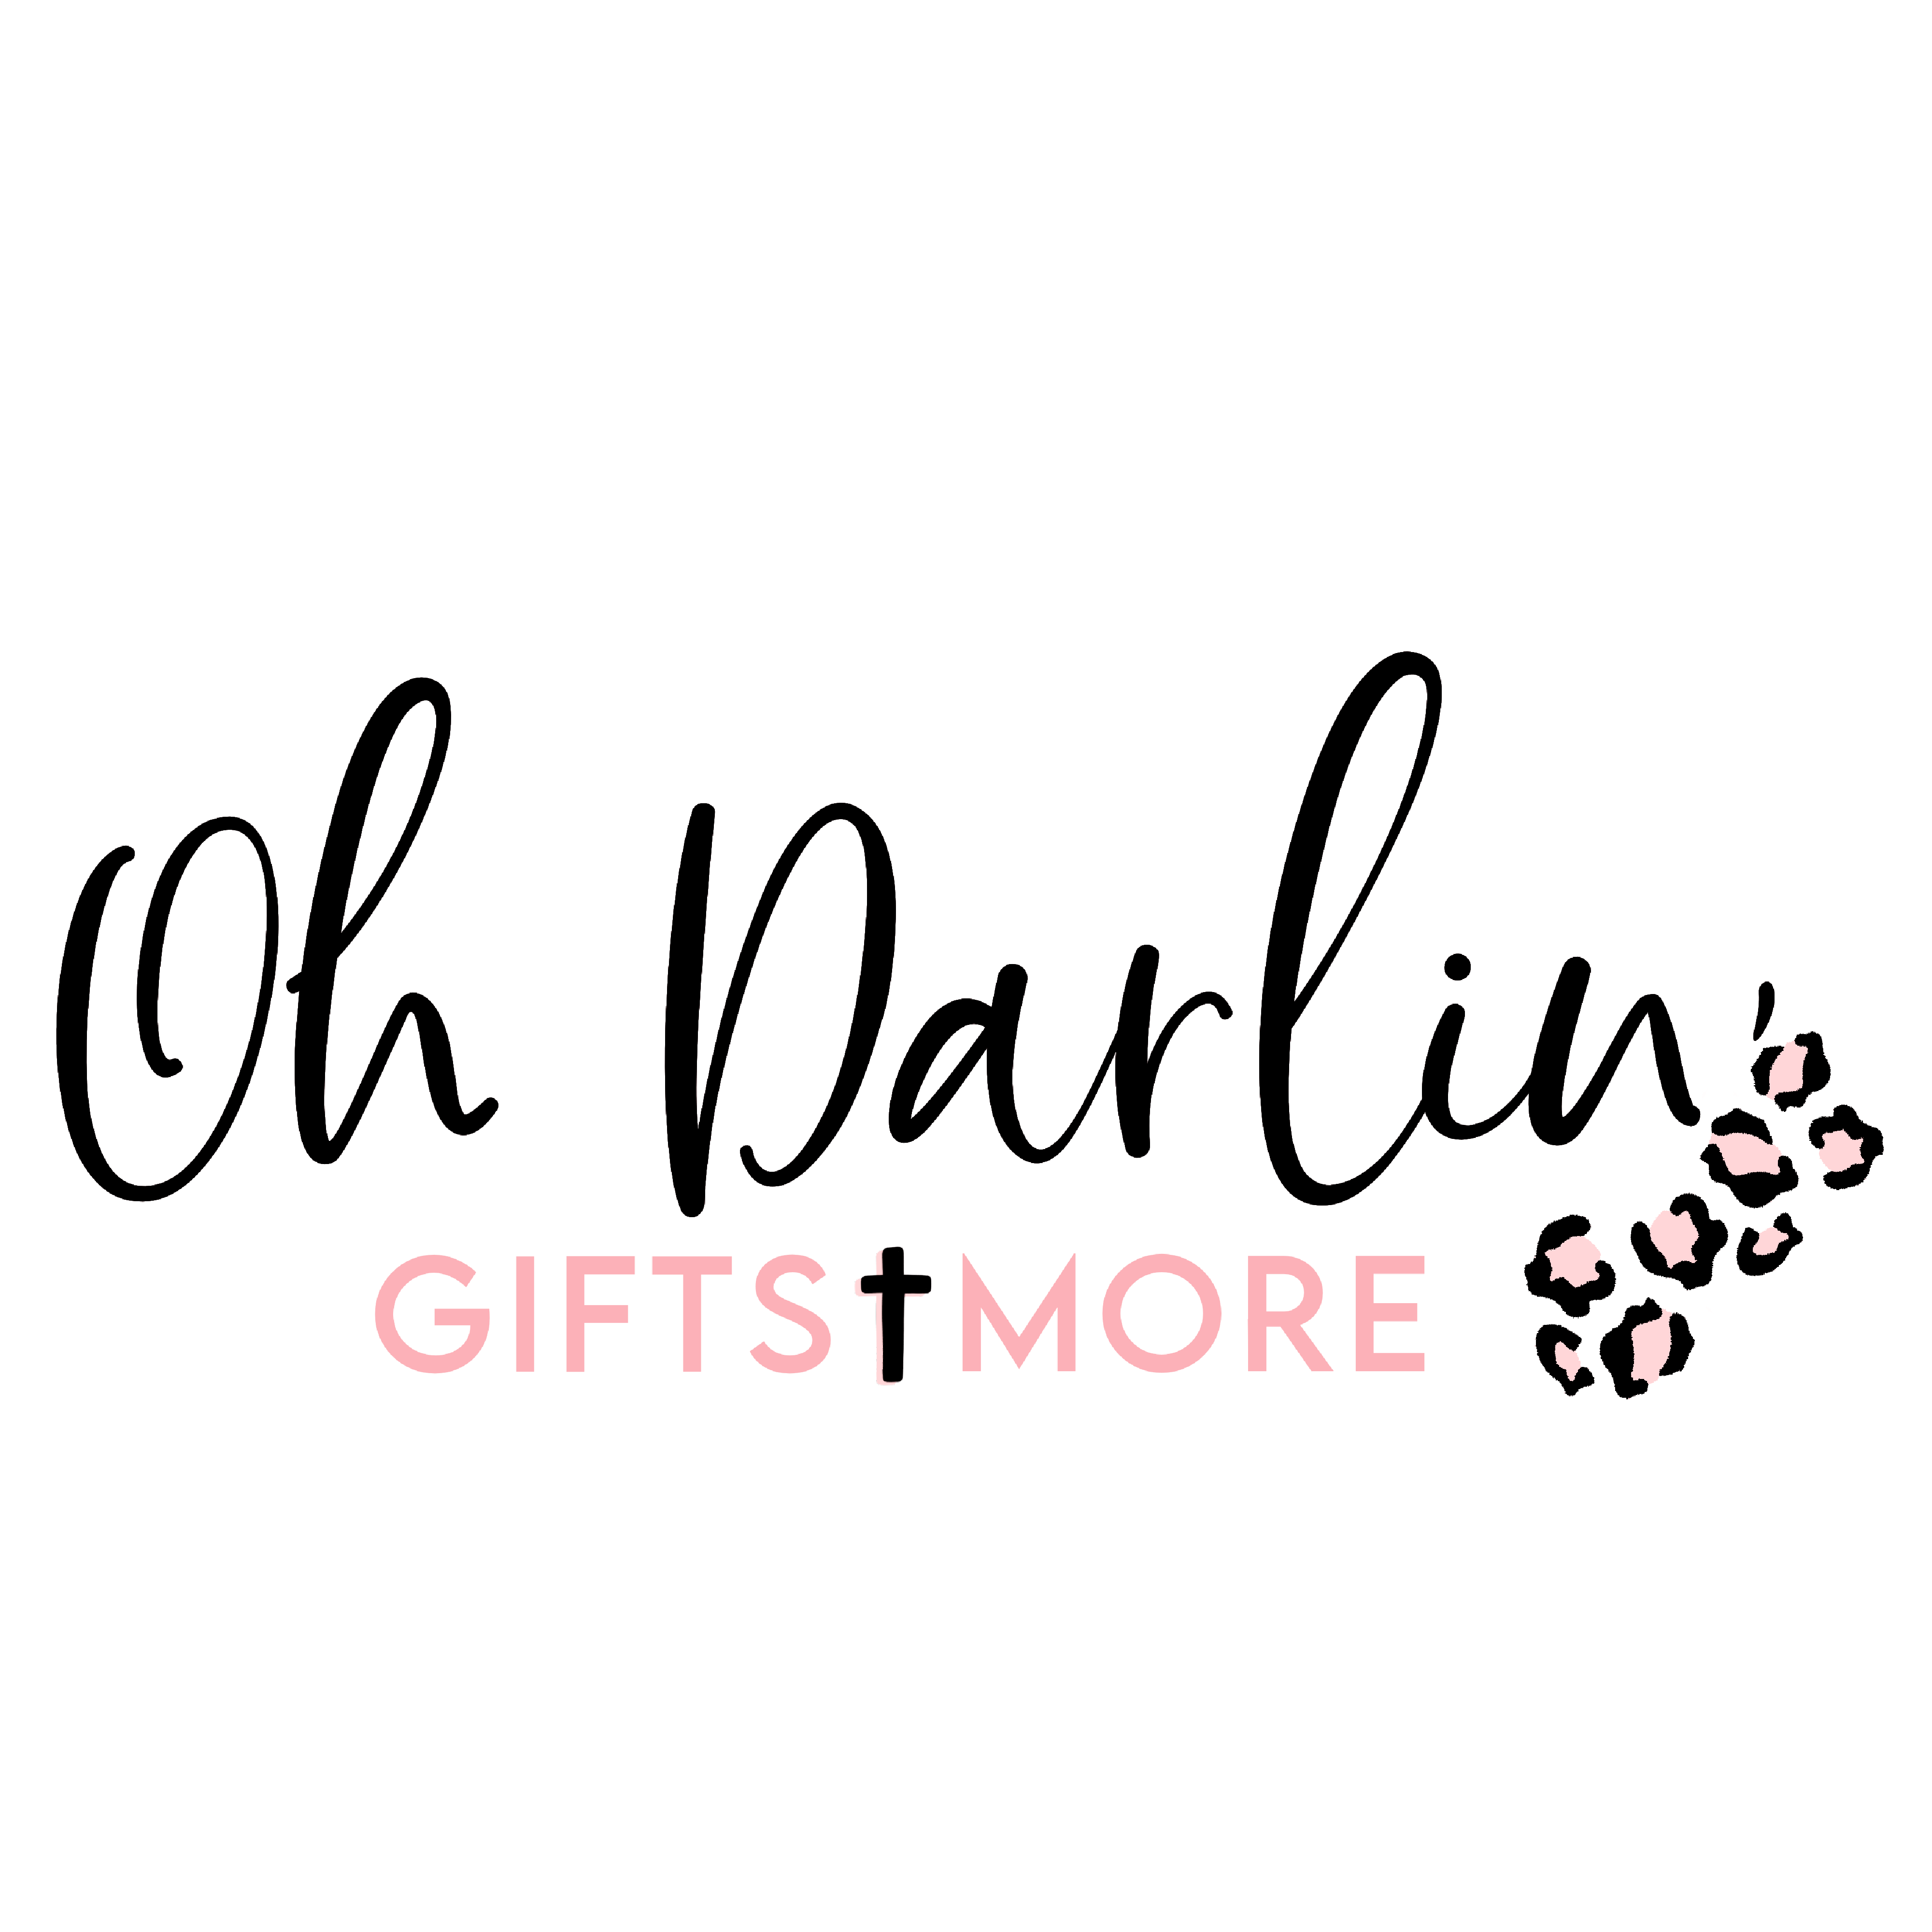 Oh Darlin! Gifts and More!